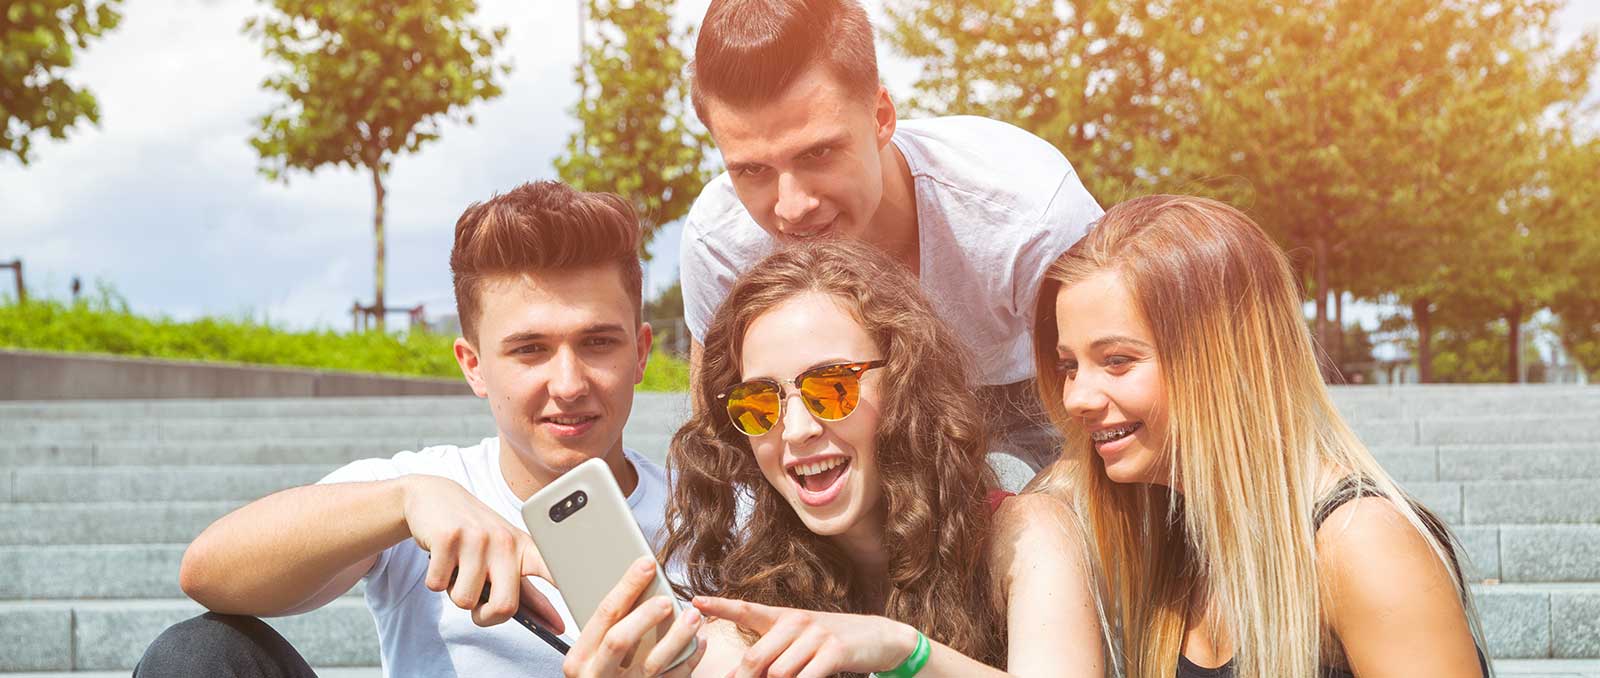 Teens looking at a phone smiling